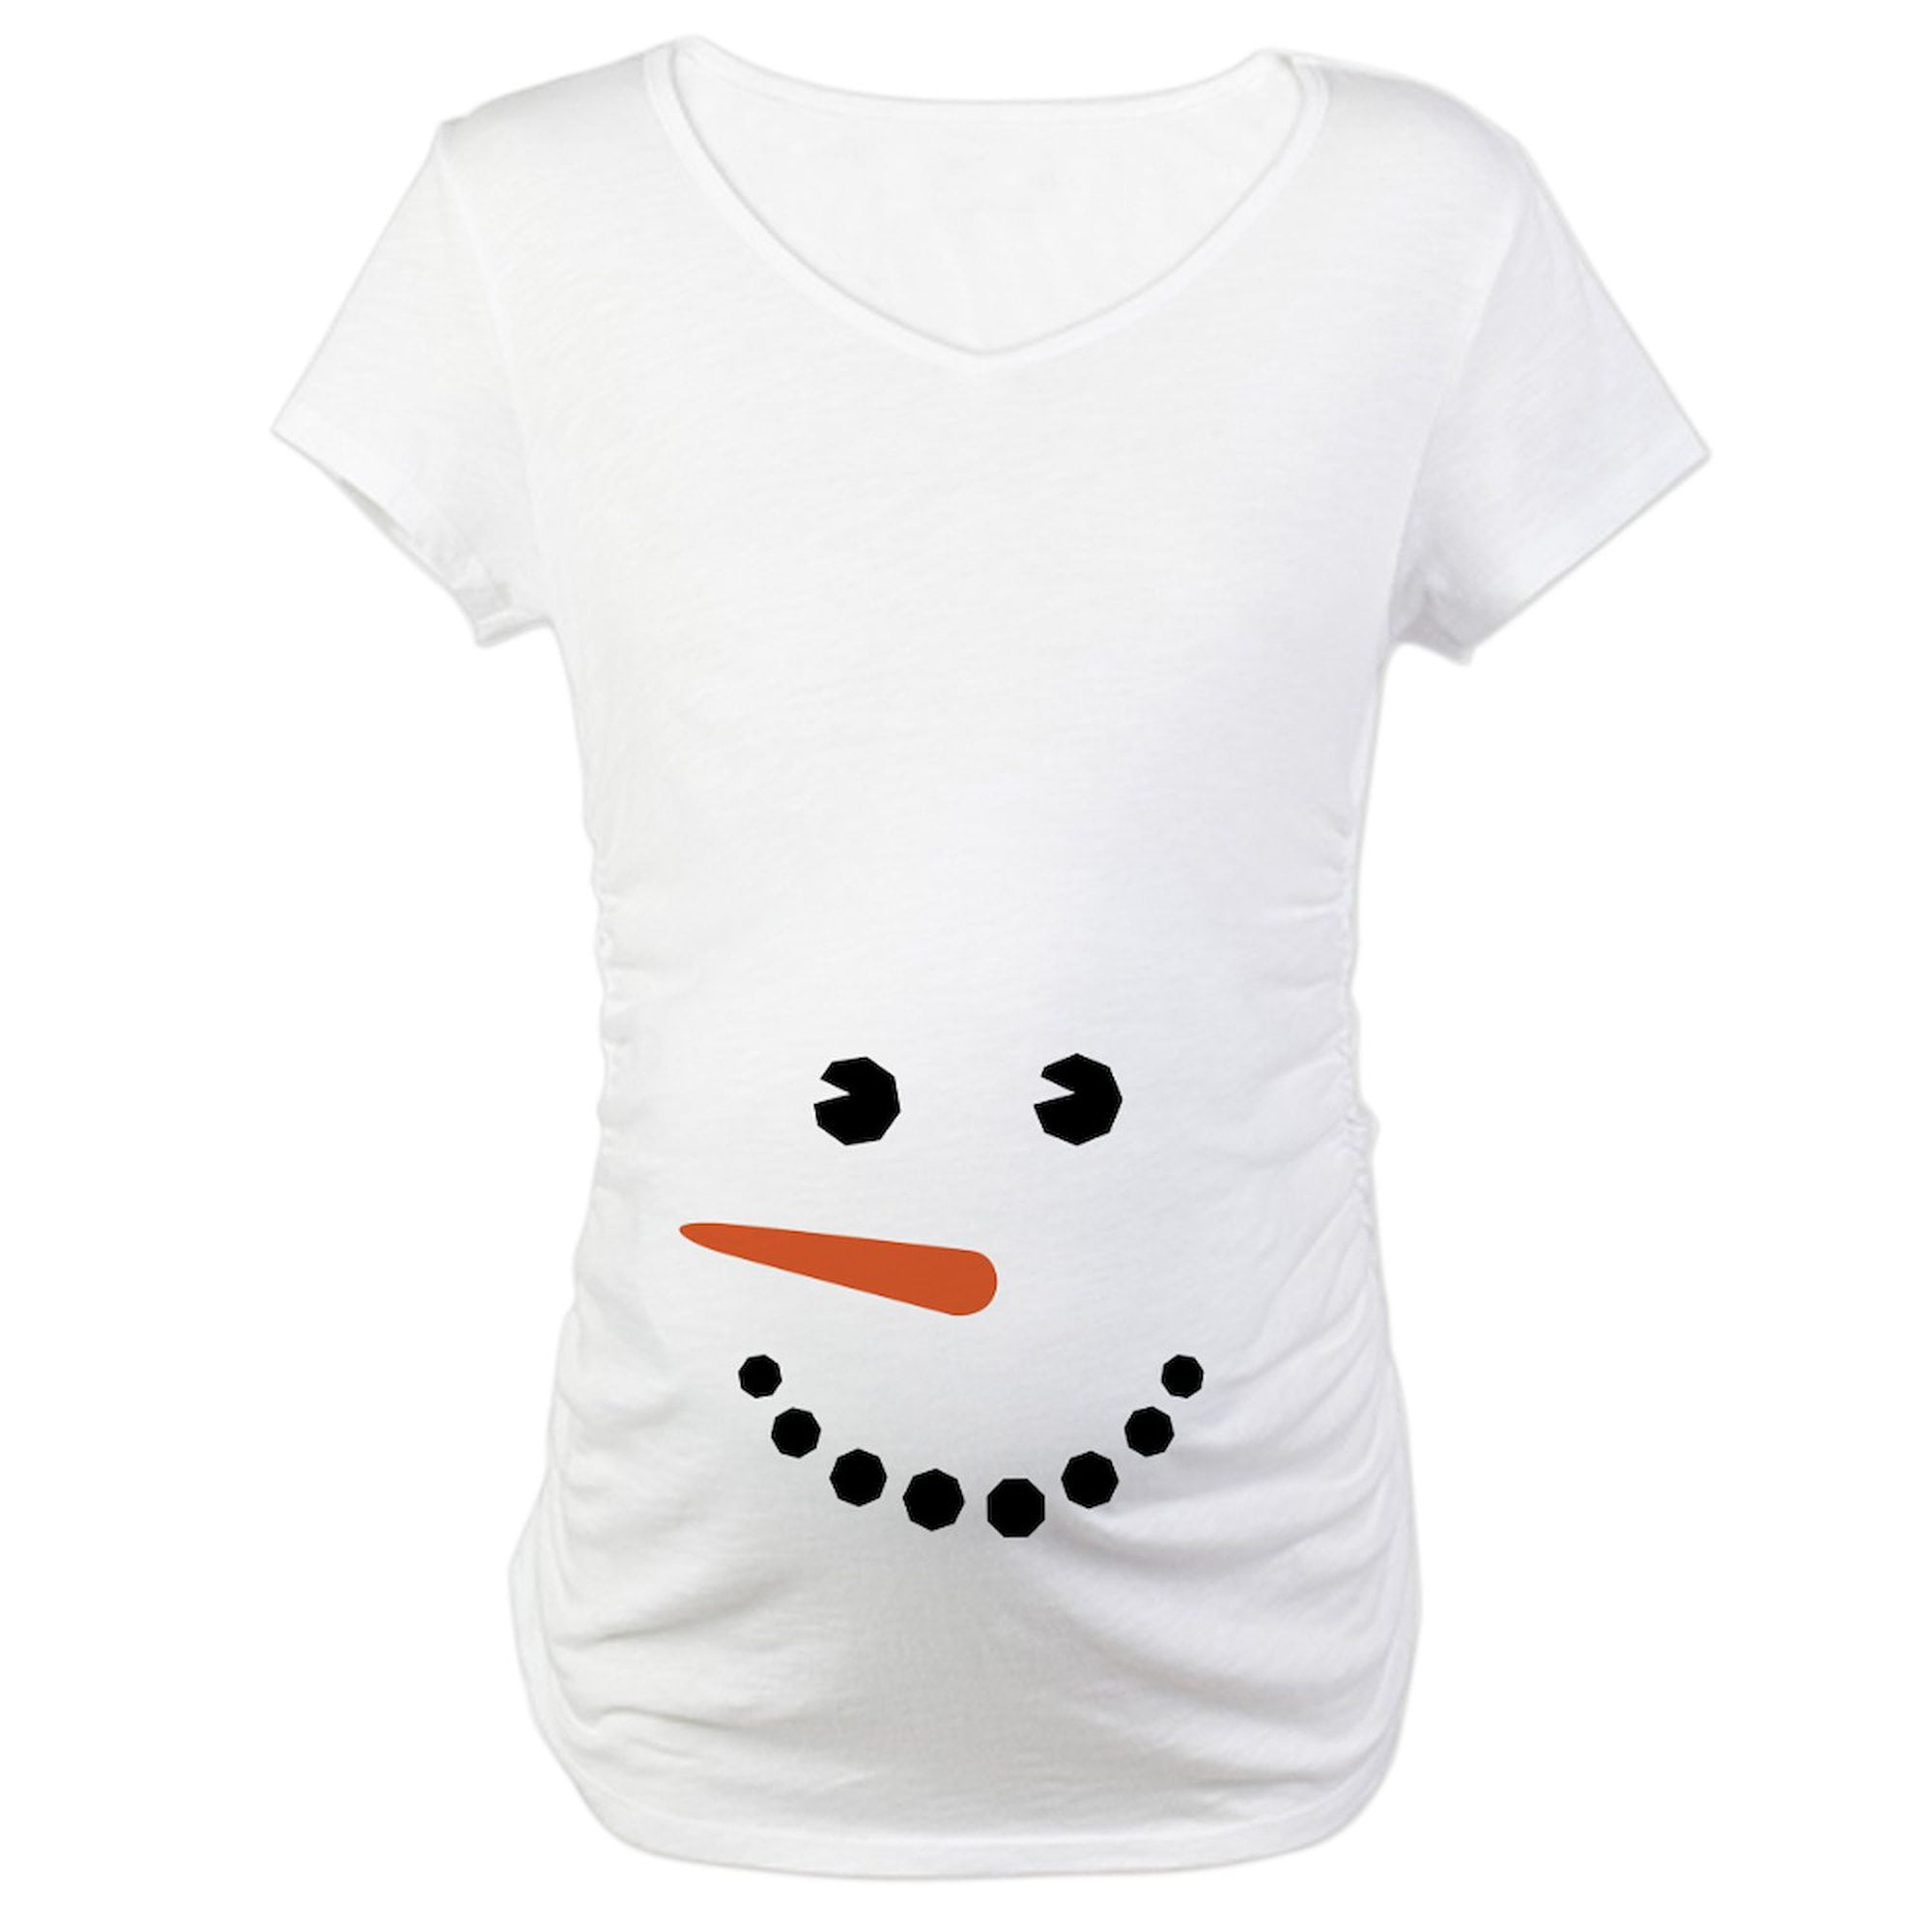 CafePress - Snowman Belly Funny Maternity T Shirt - Cotton Maternity T ...